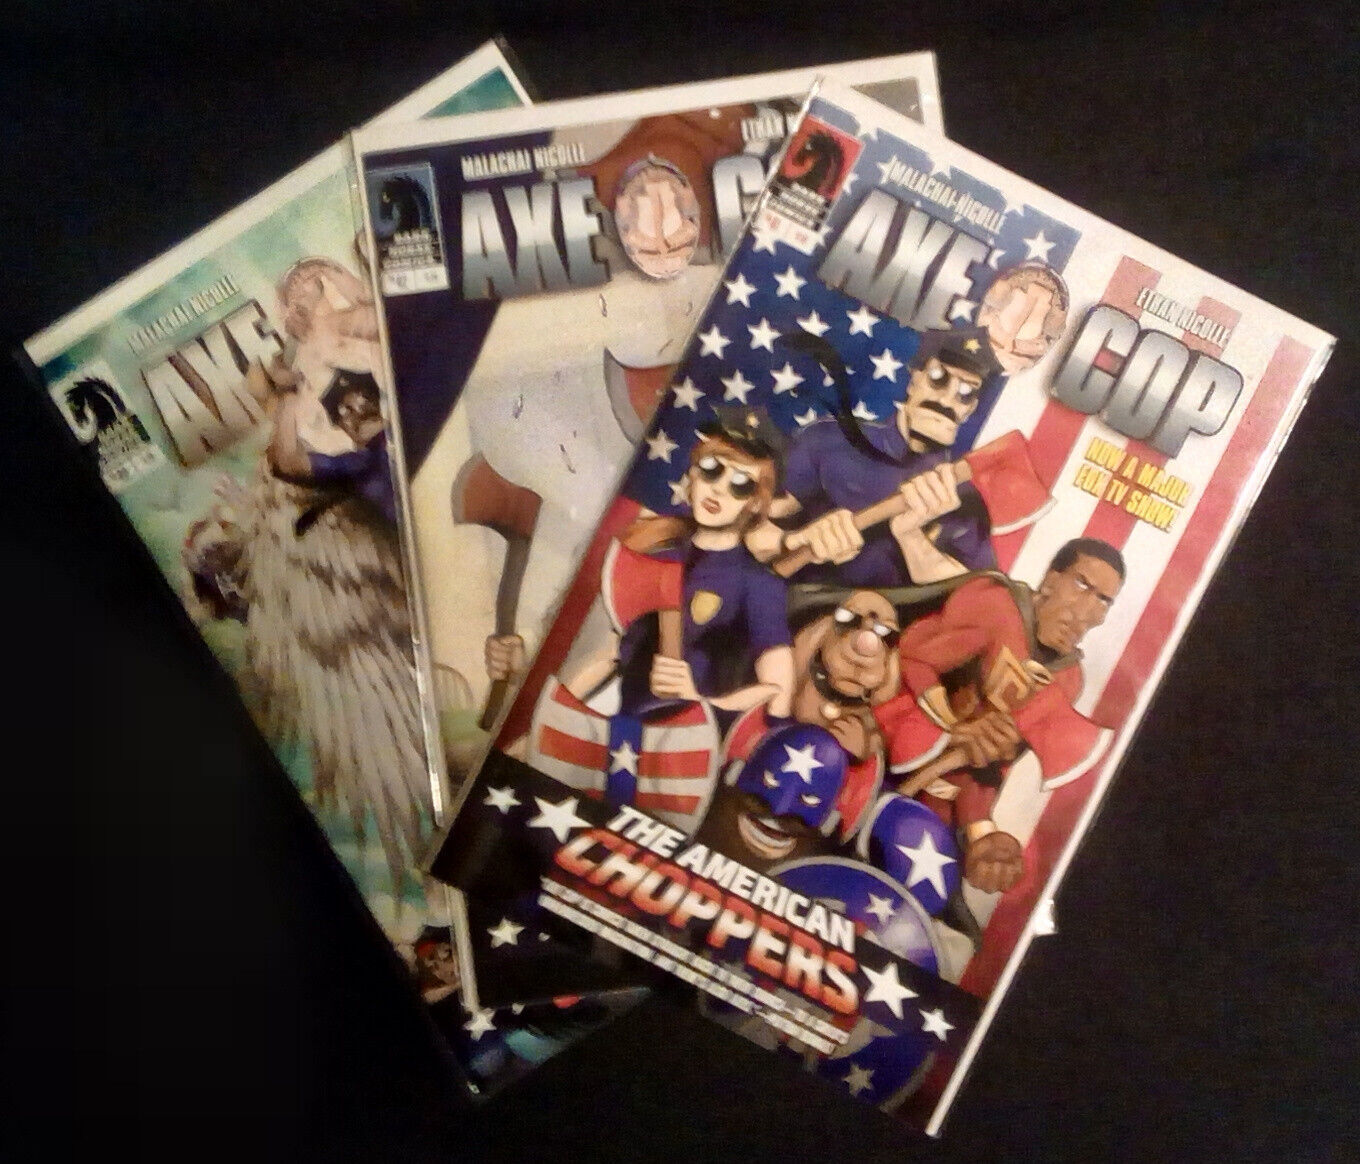 Axe Cop American Choppers #1 #2 #3 Complete Series Full Set Run All 1-3 Nicolle